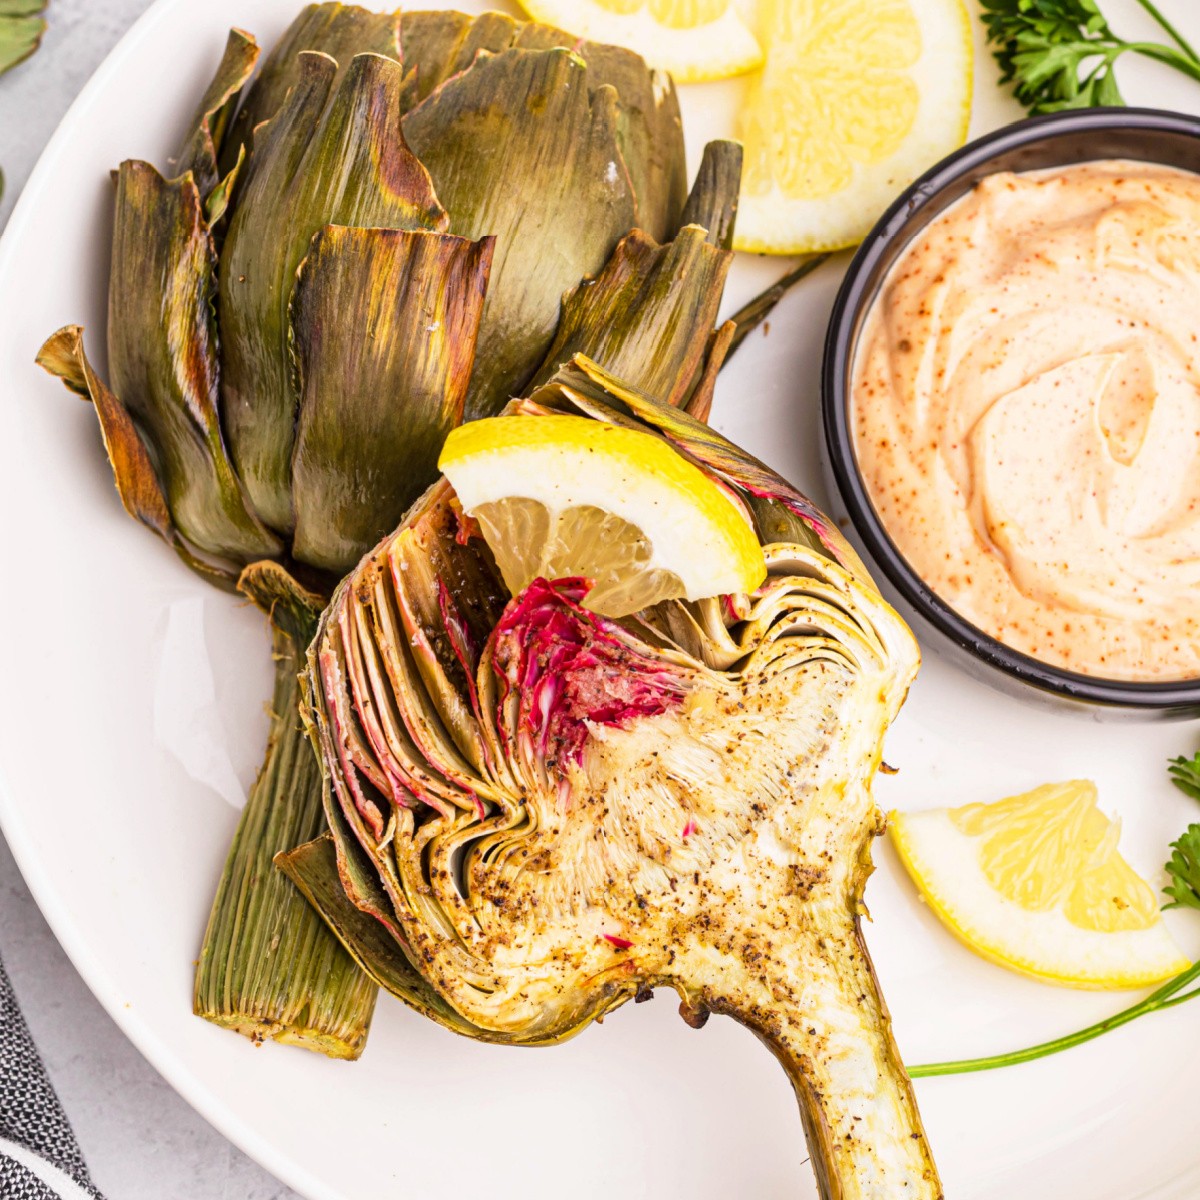 Air fryer artichoke on a white plate with a side of dipping sauce.